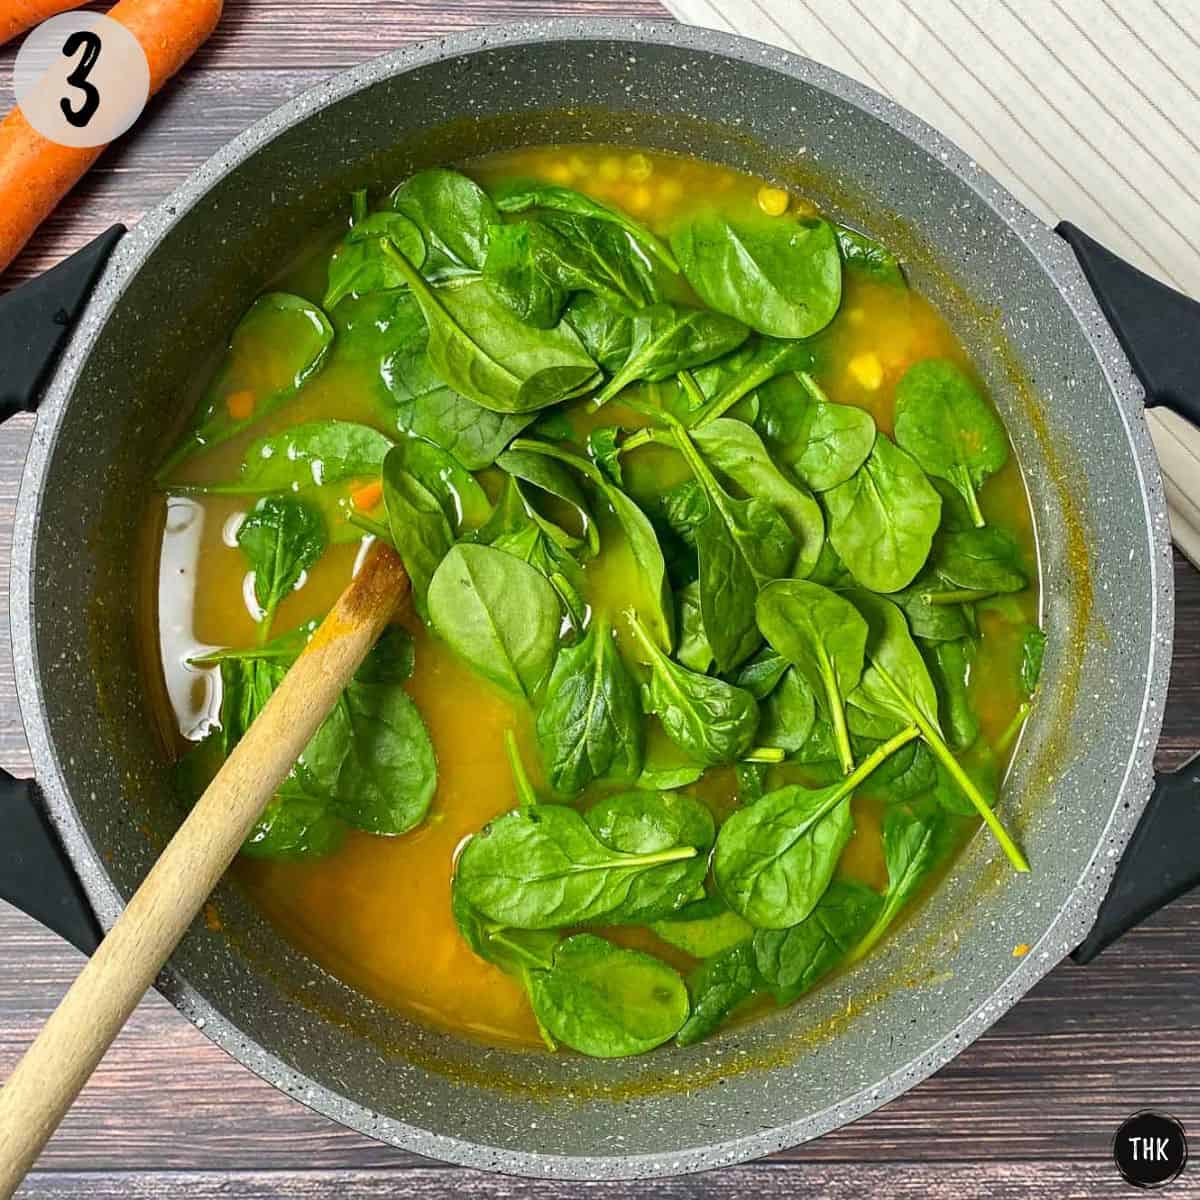 Pot of soup with fresh baby spinach leaves added.